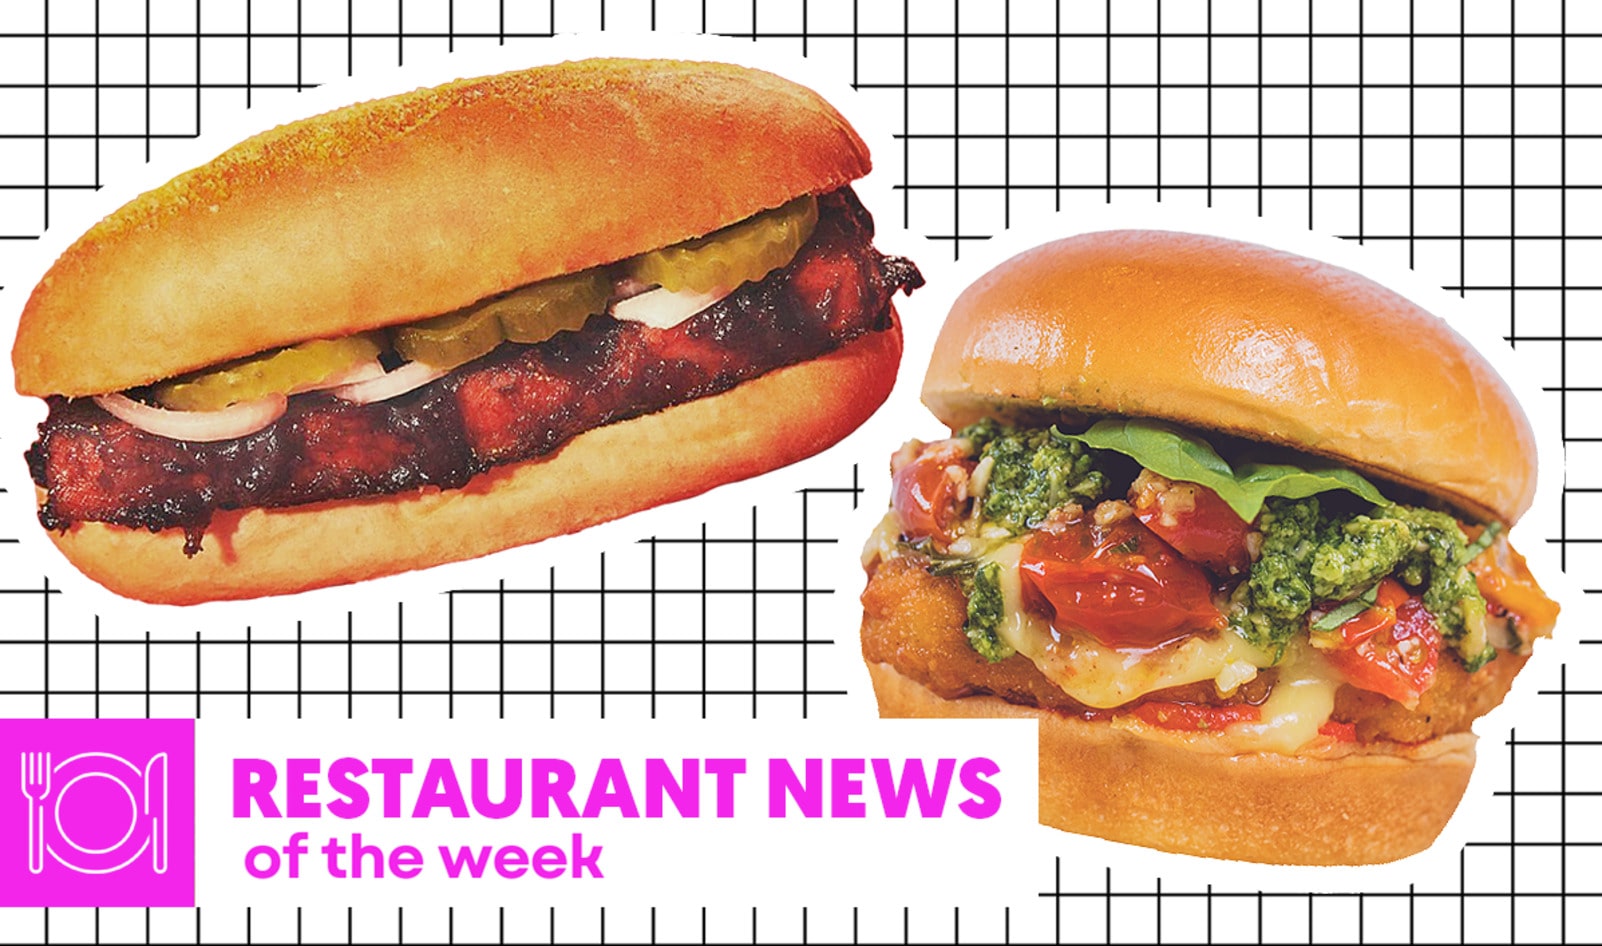 Vegan Restaurant News of the Week: “McRib,” Chicken Parm, and More